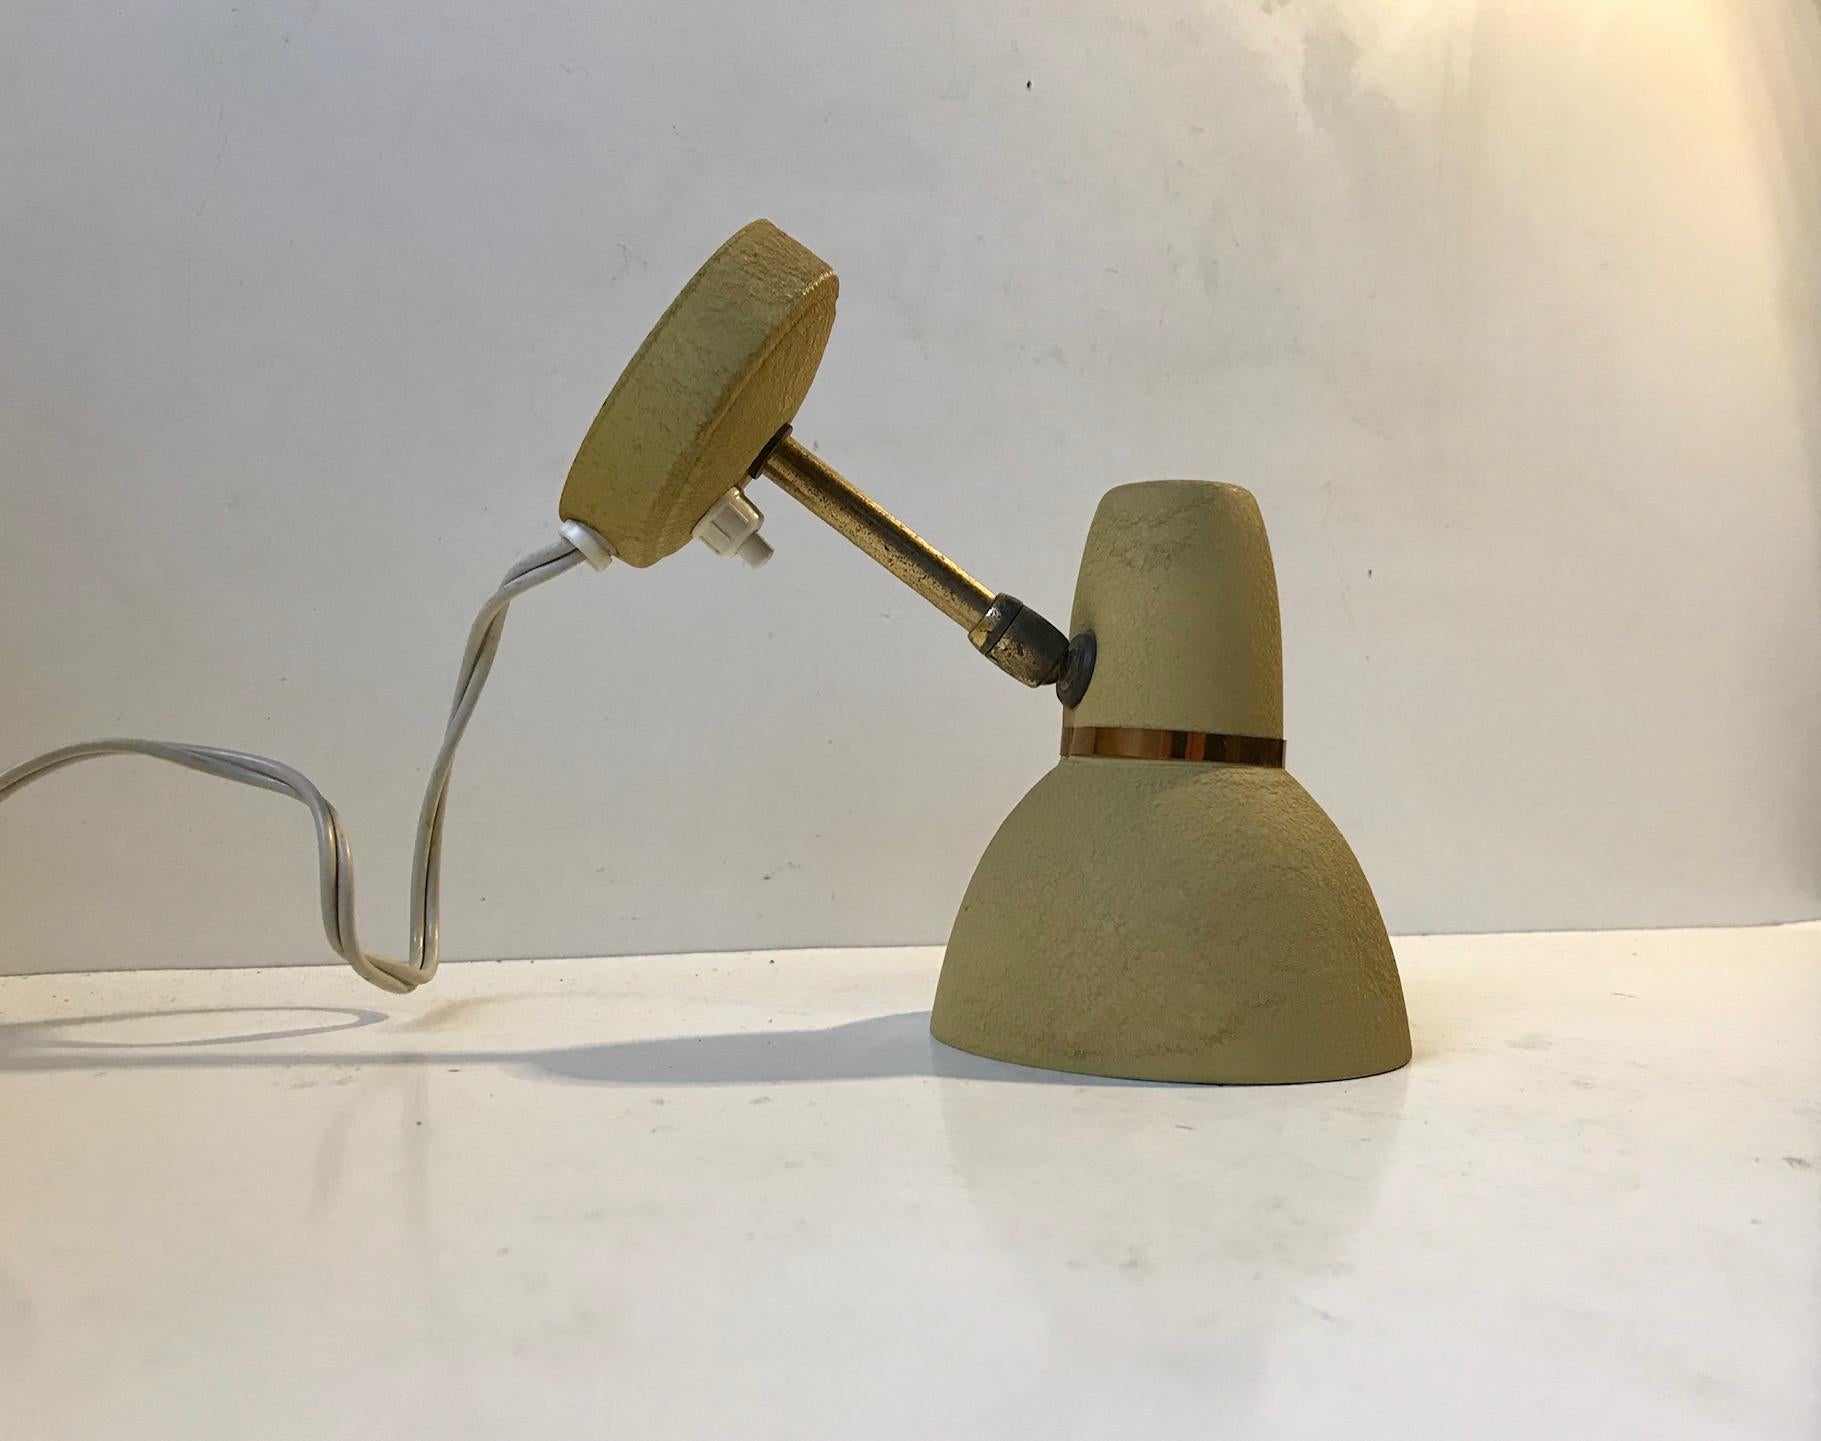 Scandinavian Pastel Yellow Wall Lamp in Brass and Alu, 1950s For Sale 1